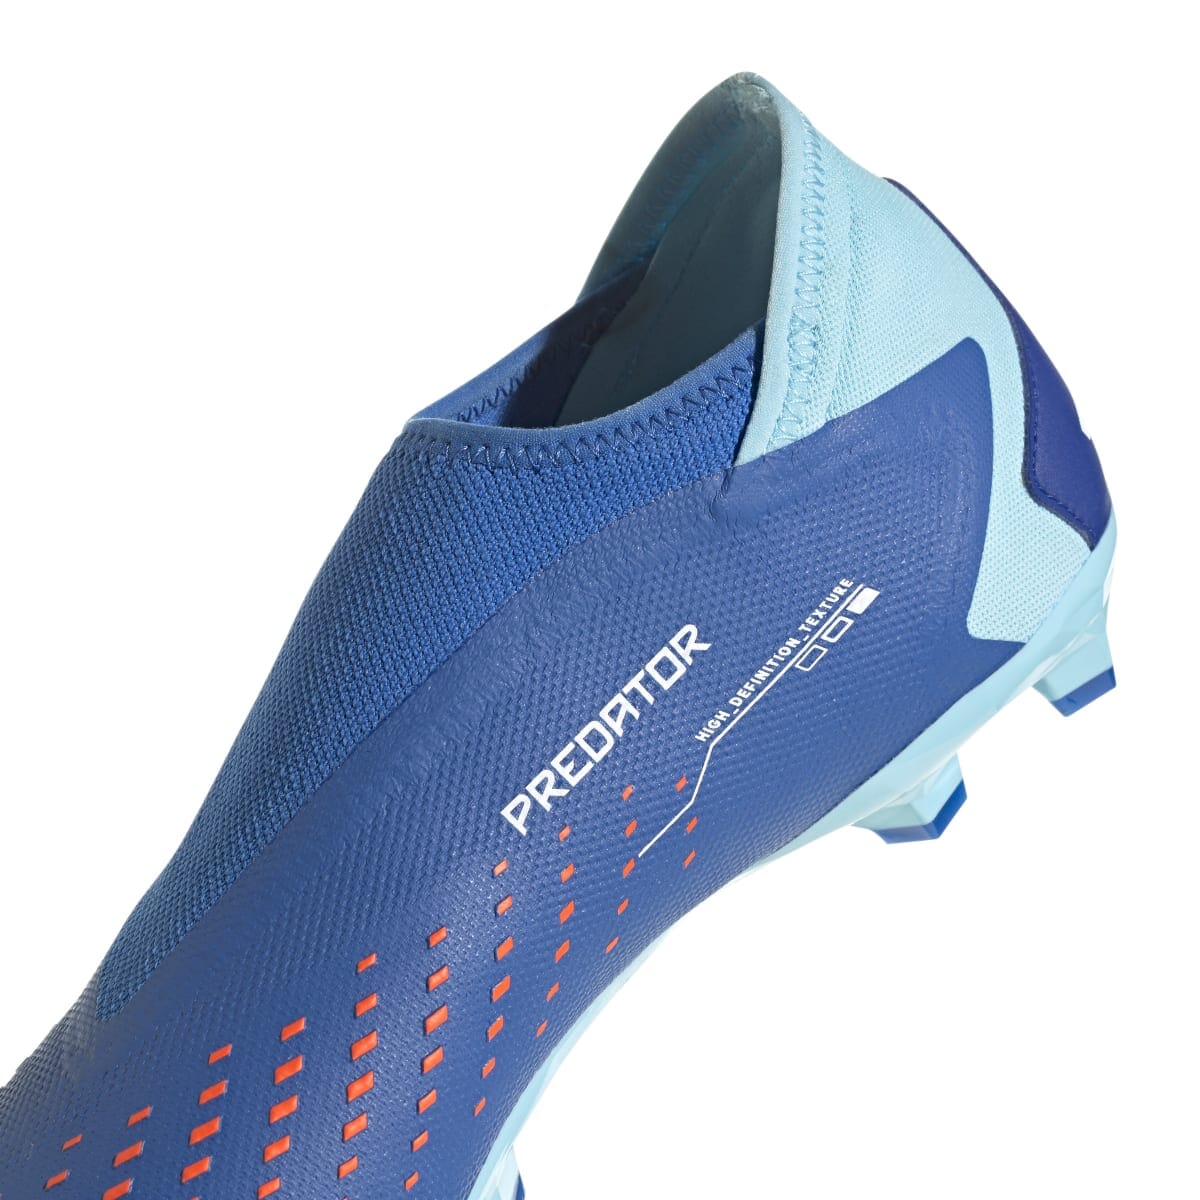 adidas Unisex Predator Accuracy.3 Laceless Firm Ground Soccer Shoes | GZ0019 Soccer Shoes Adidas 